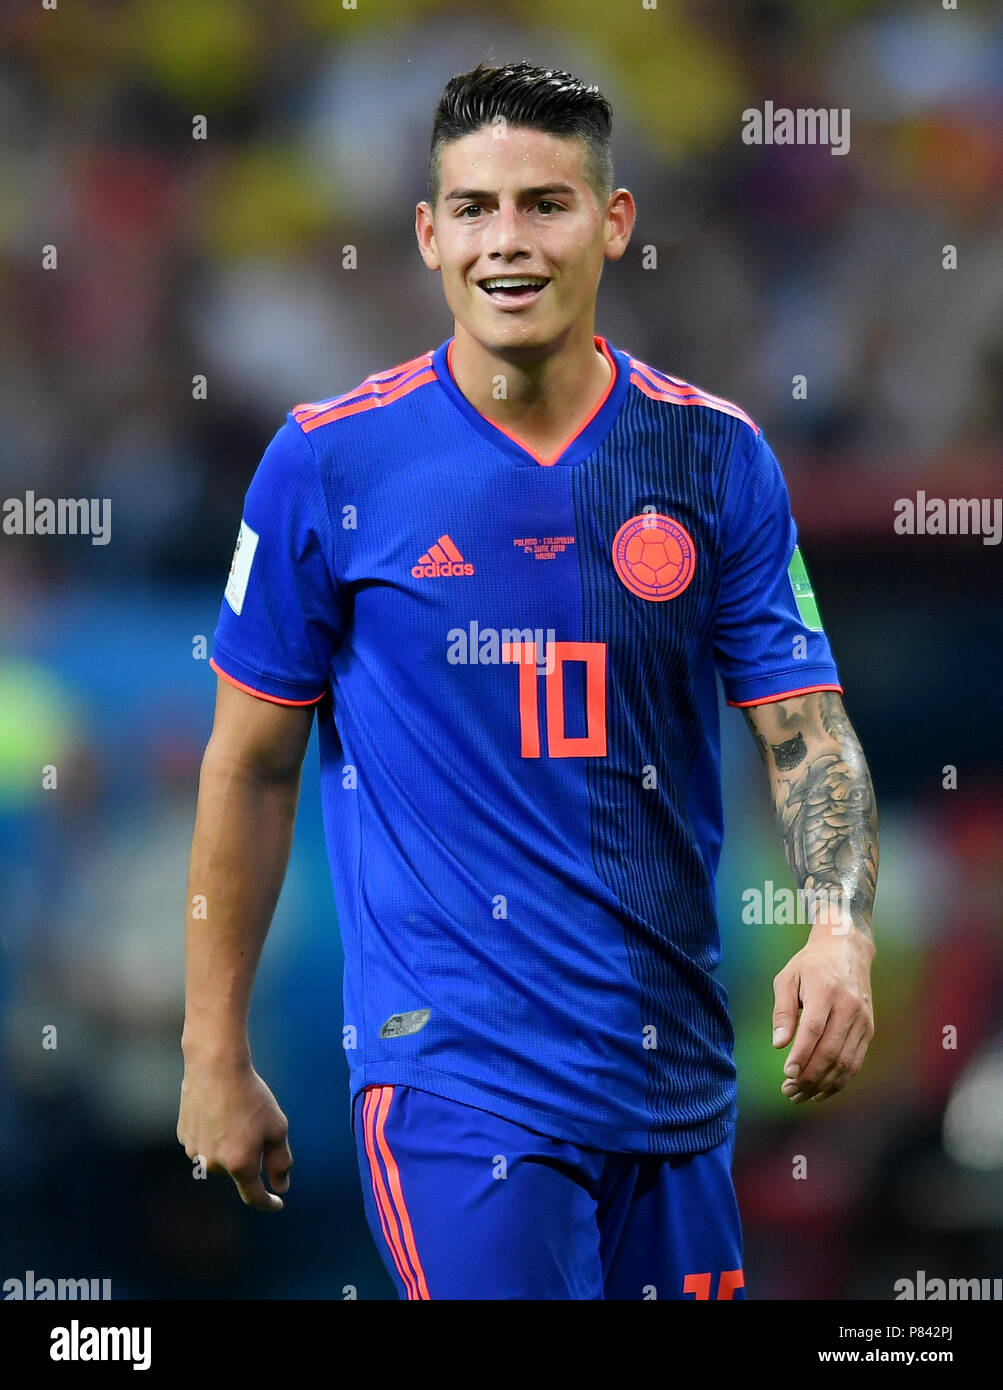 KAZAN, RUSSIA - JUNE 24: James Rodriguez of Colombia reacts during the 2018 FIFA World Cup Russia group H match between Poland and Colombia at Kazan Arena on June 24, 2018 in Kazan, Russia. (Photo by Lukasz Laskowski/PressFocus/MB Media) Stock Photo